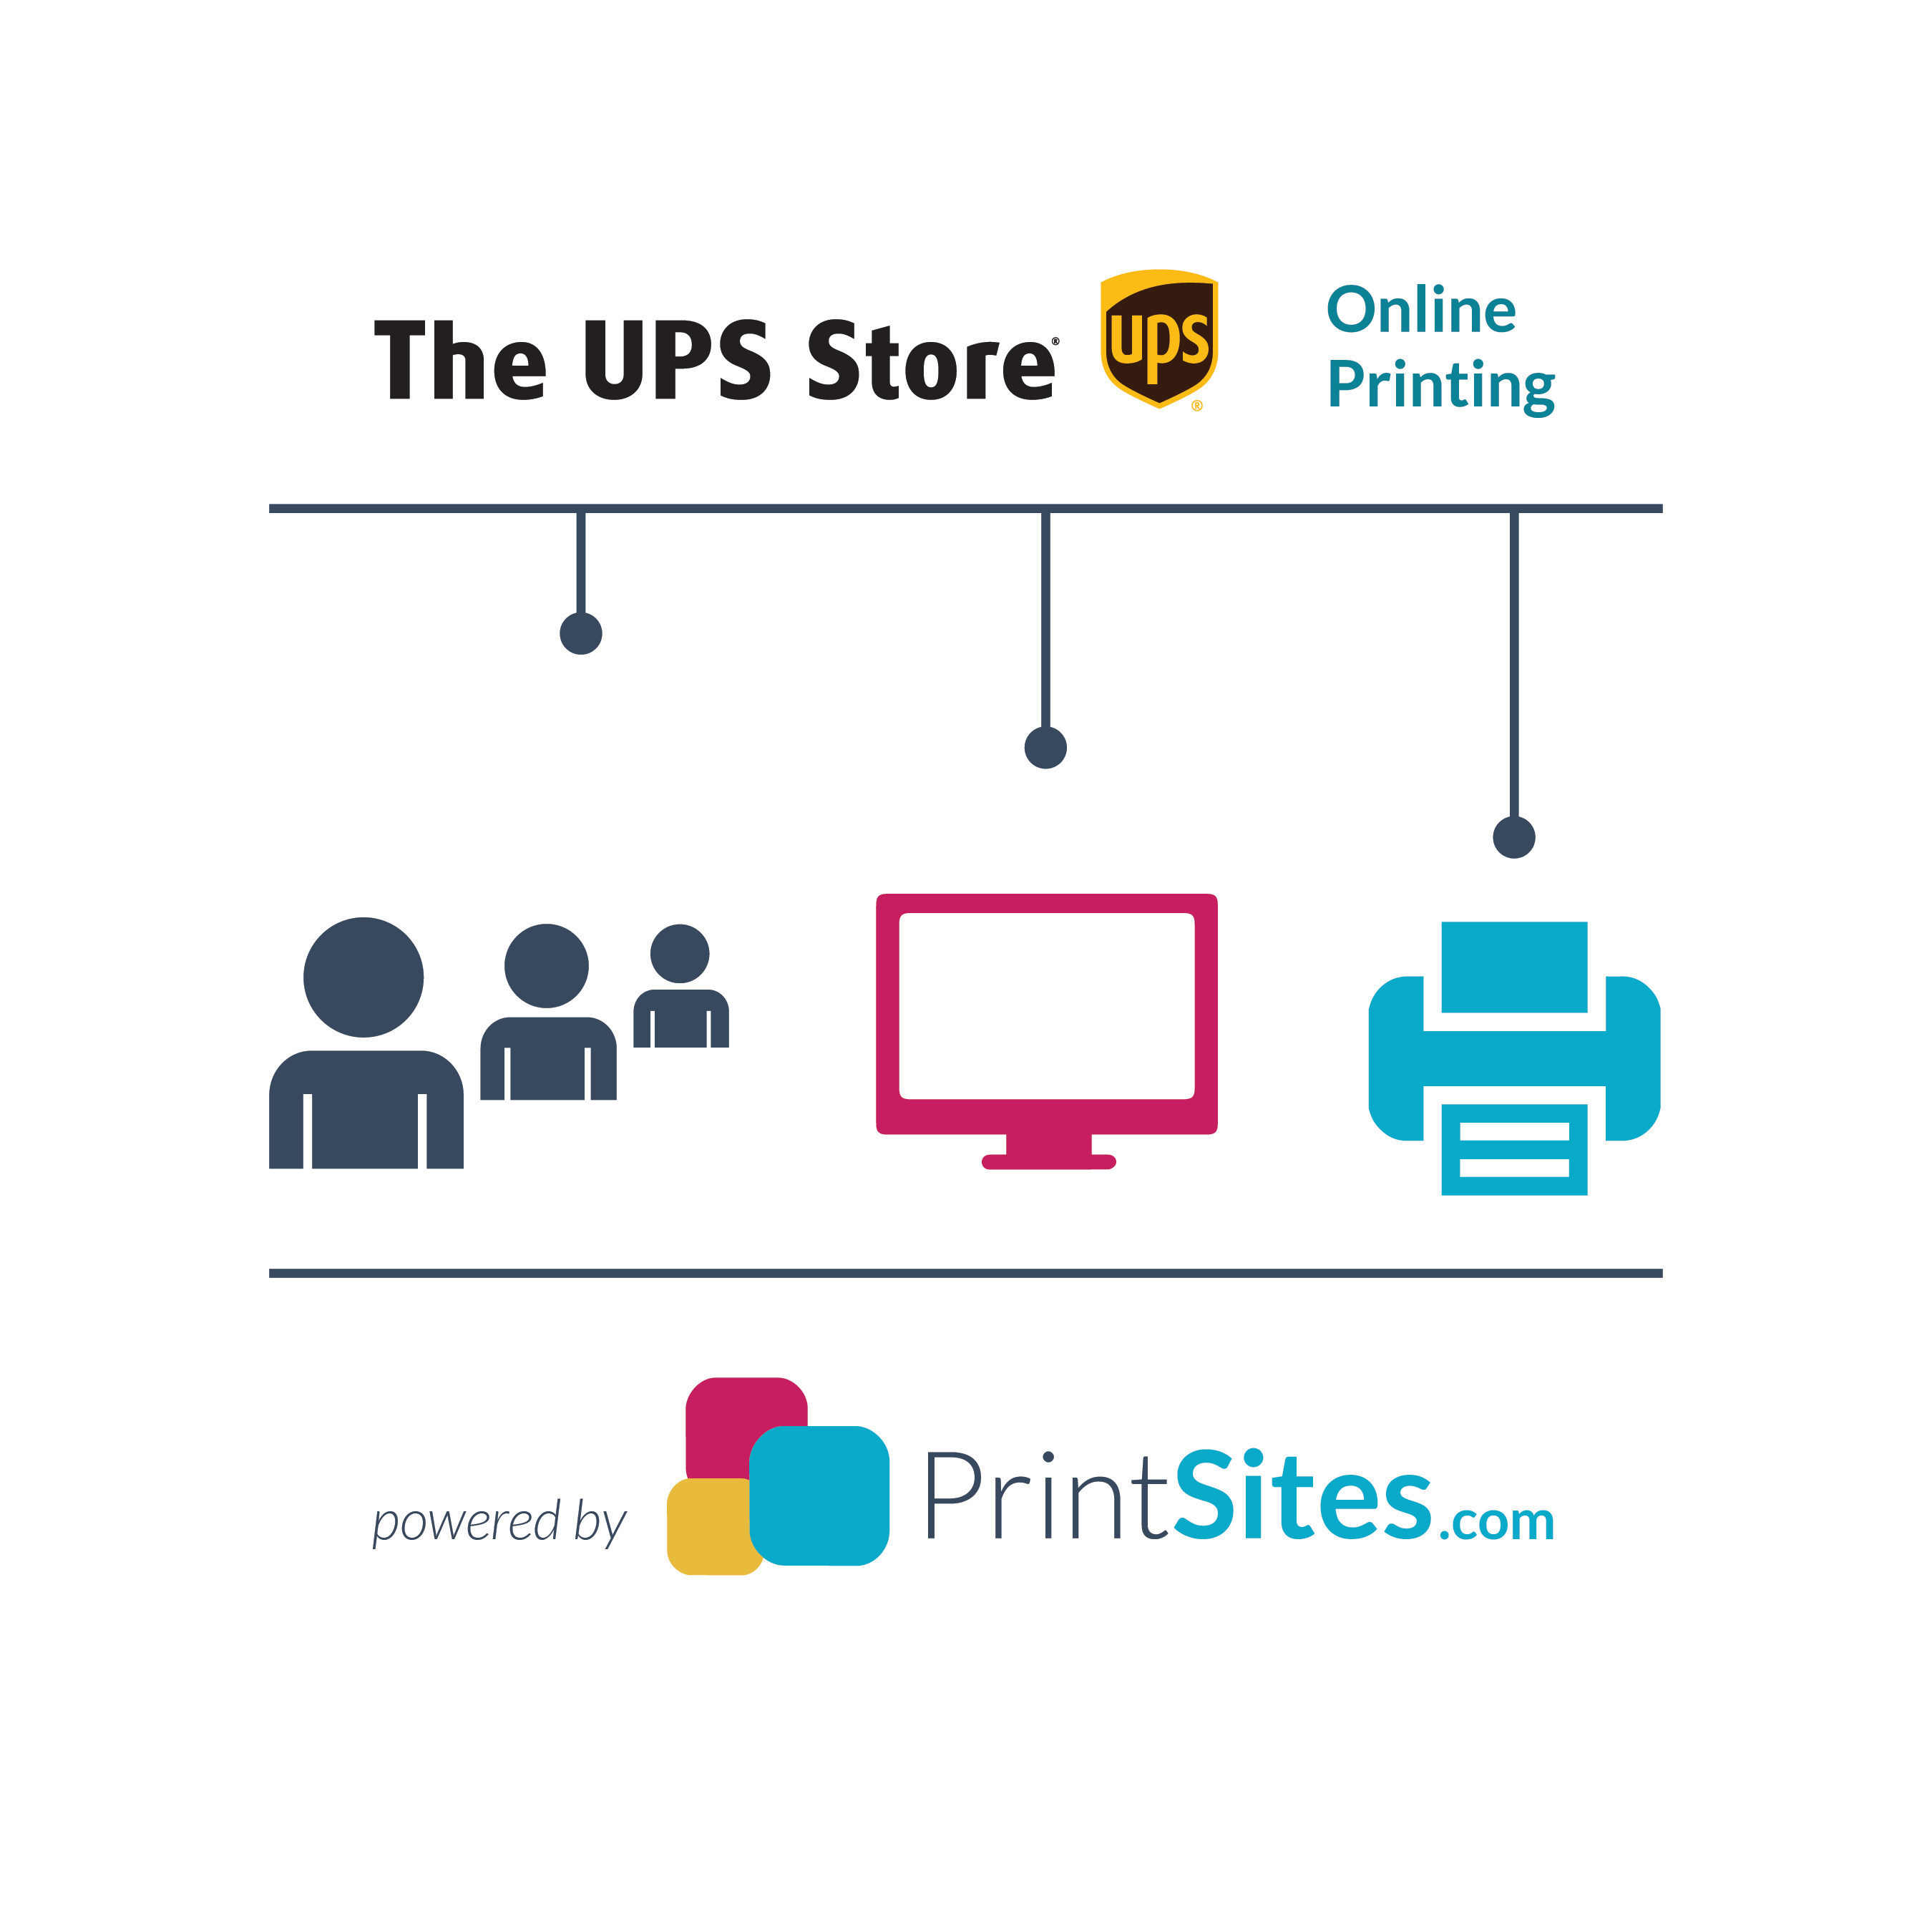 Over 4,400 The UPS Store locations put customer convenience first with new online print platform powered by PrintSites